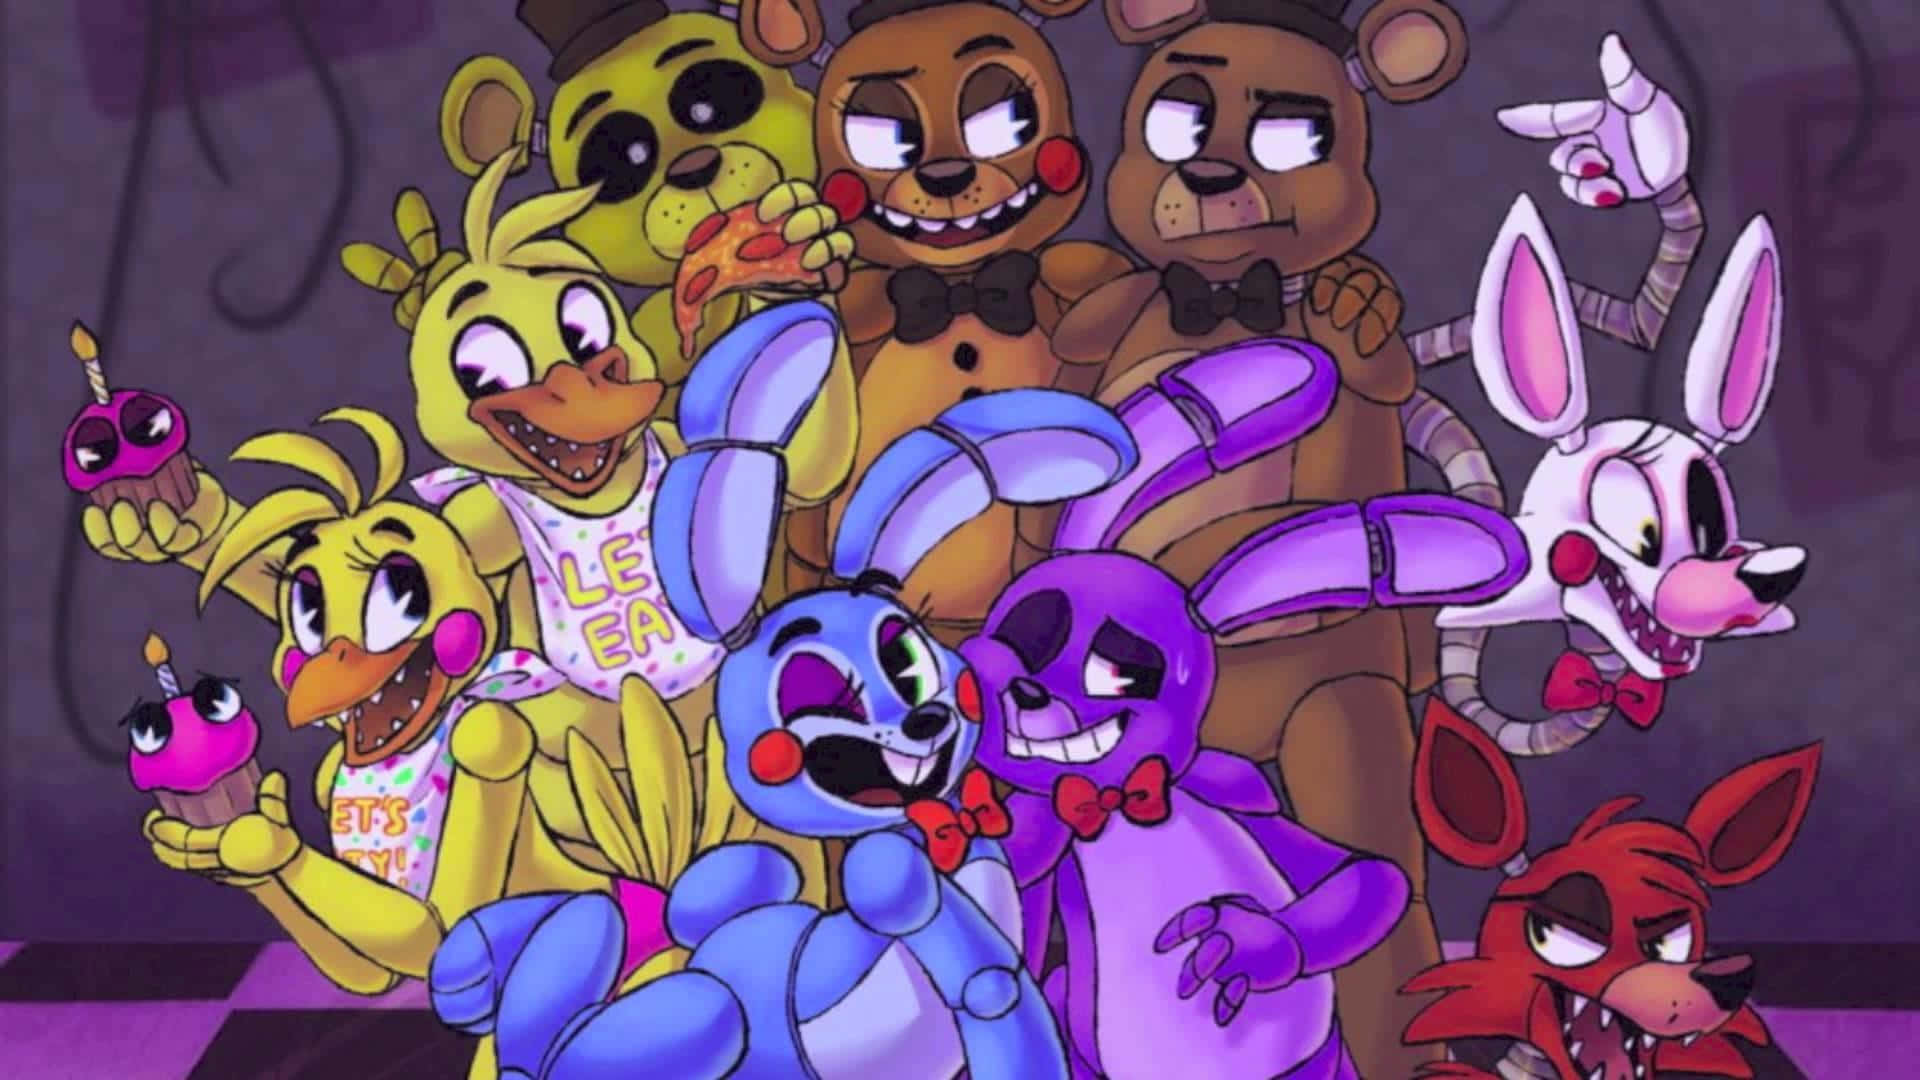 The Cast of Five Nights at Freddy's